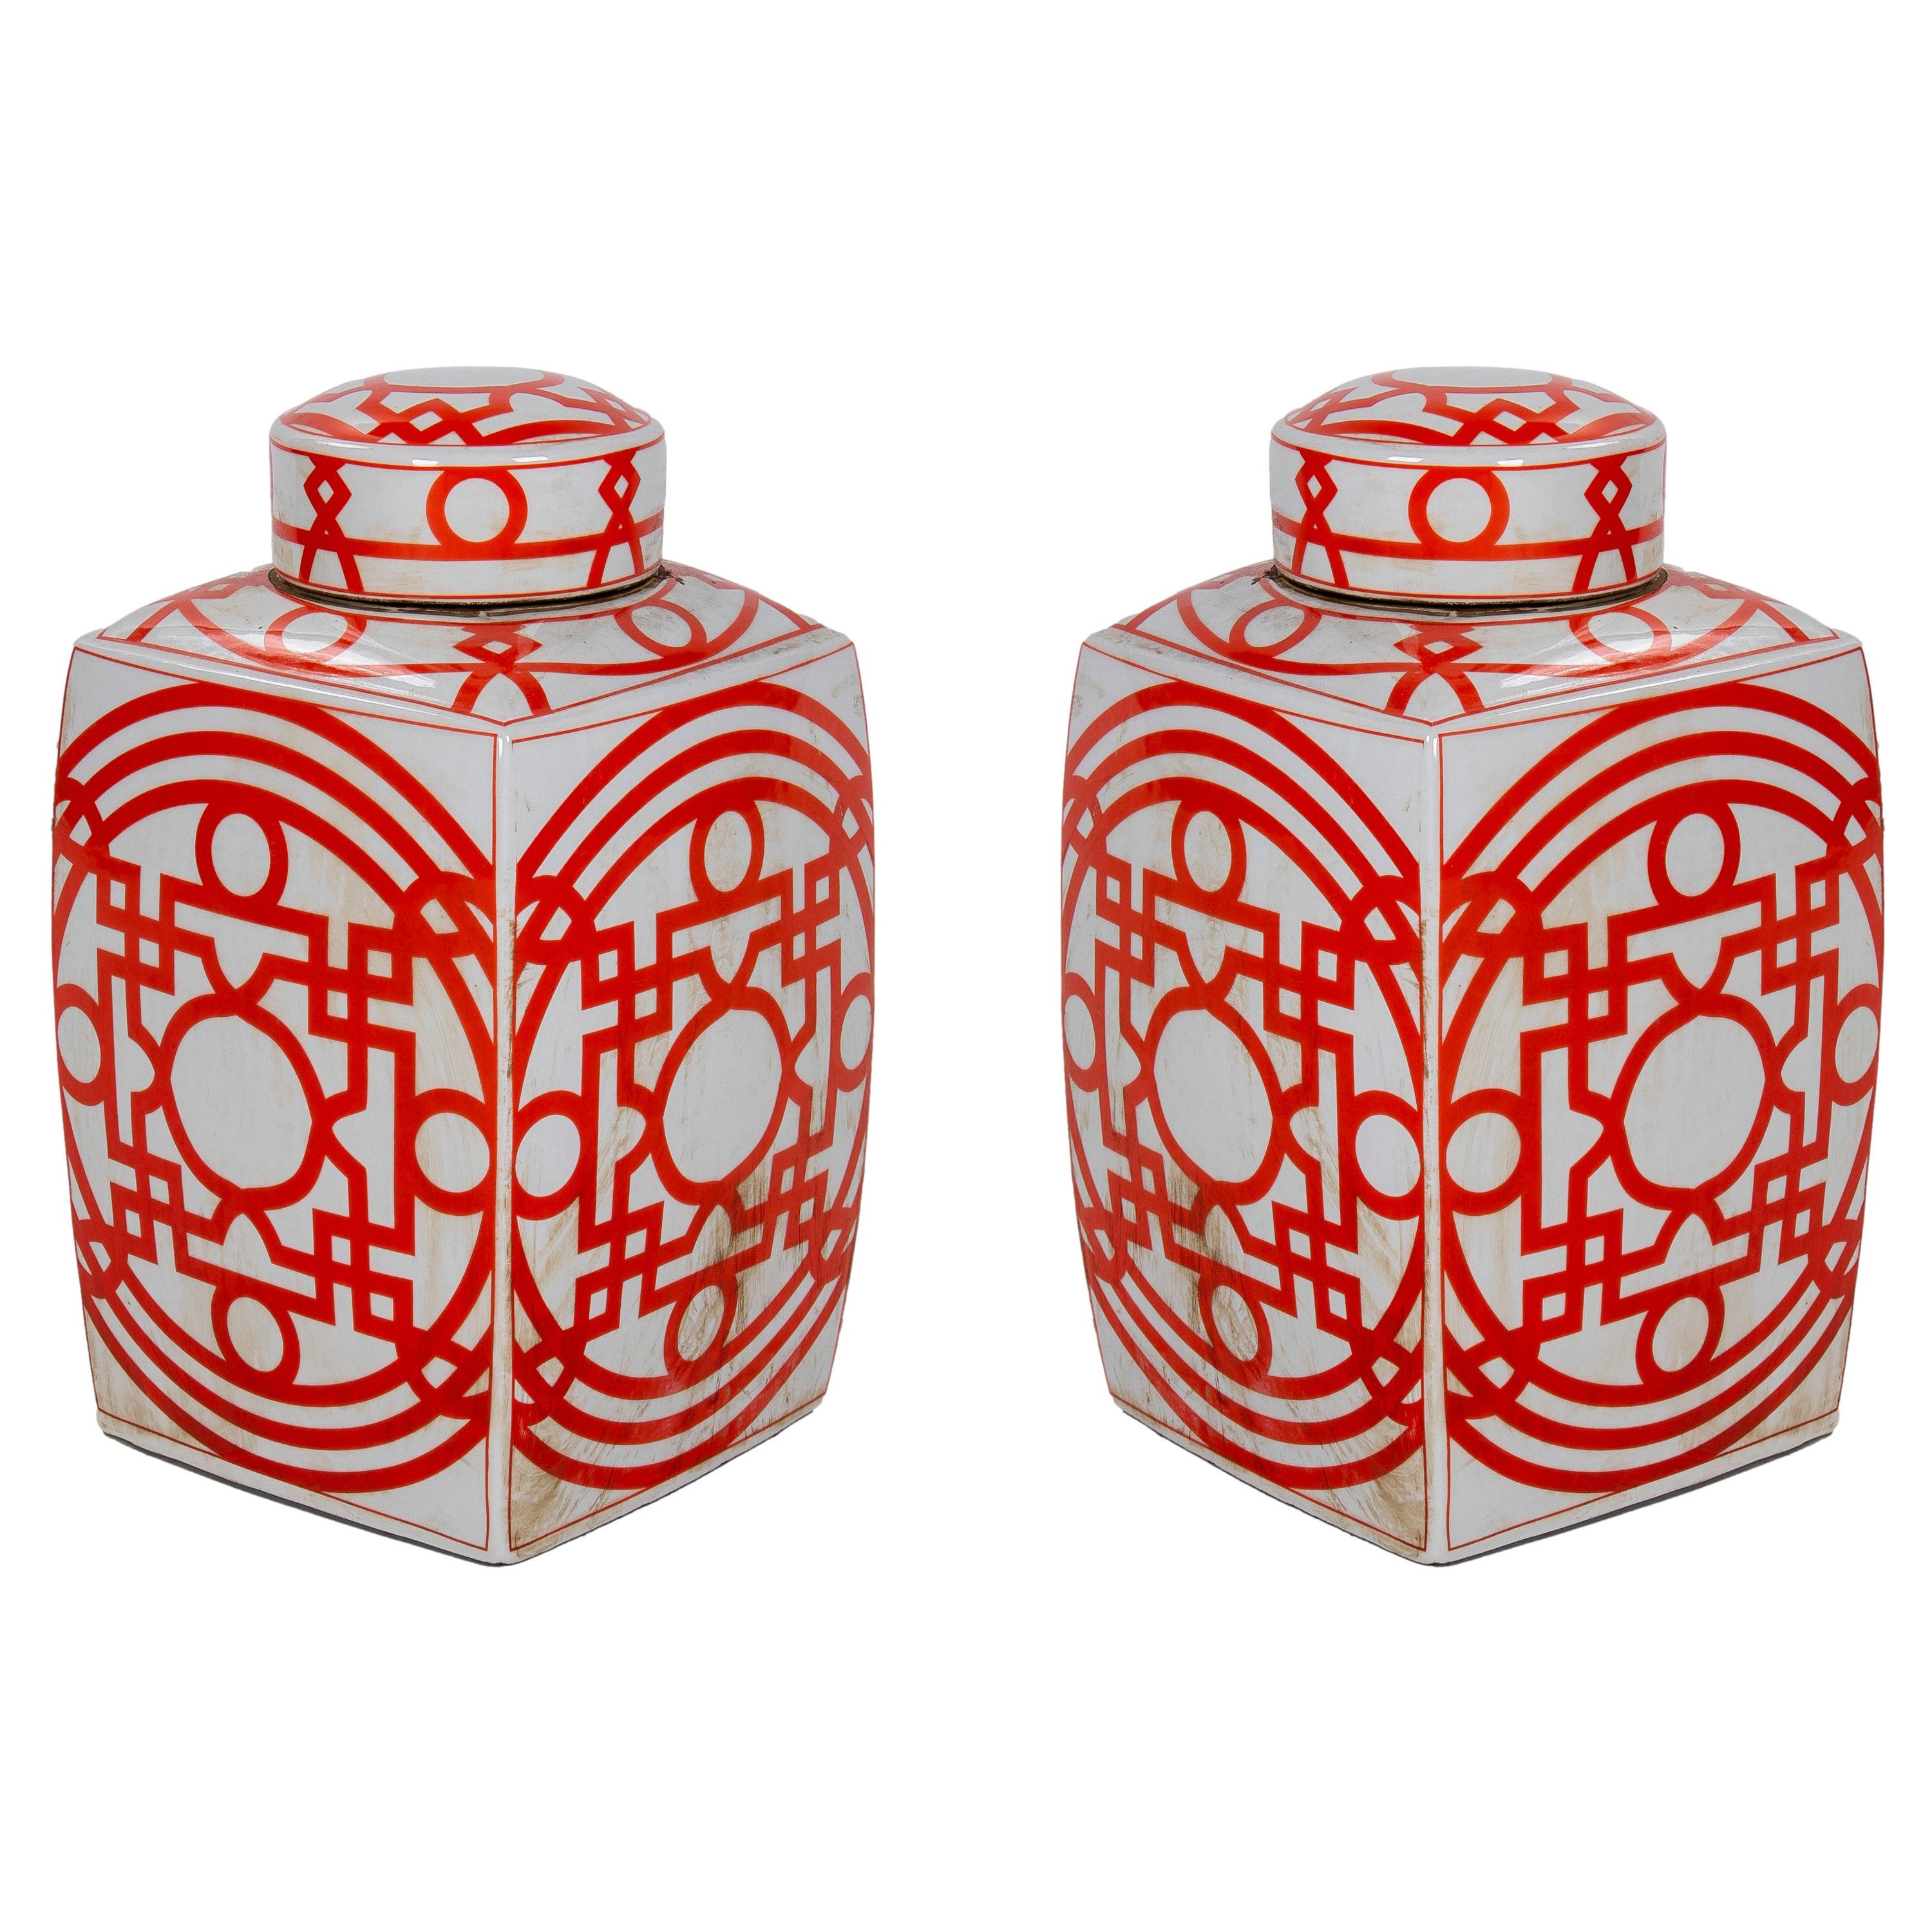 Pair of Asian White Glazed Porcelain Urns w/ Red Geometric Decorations & Lids